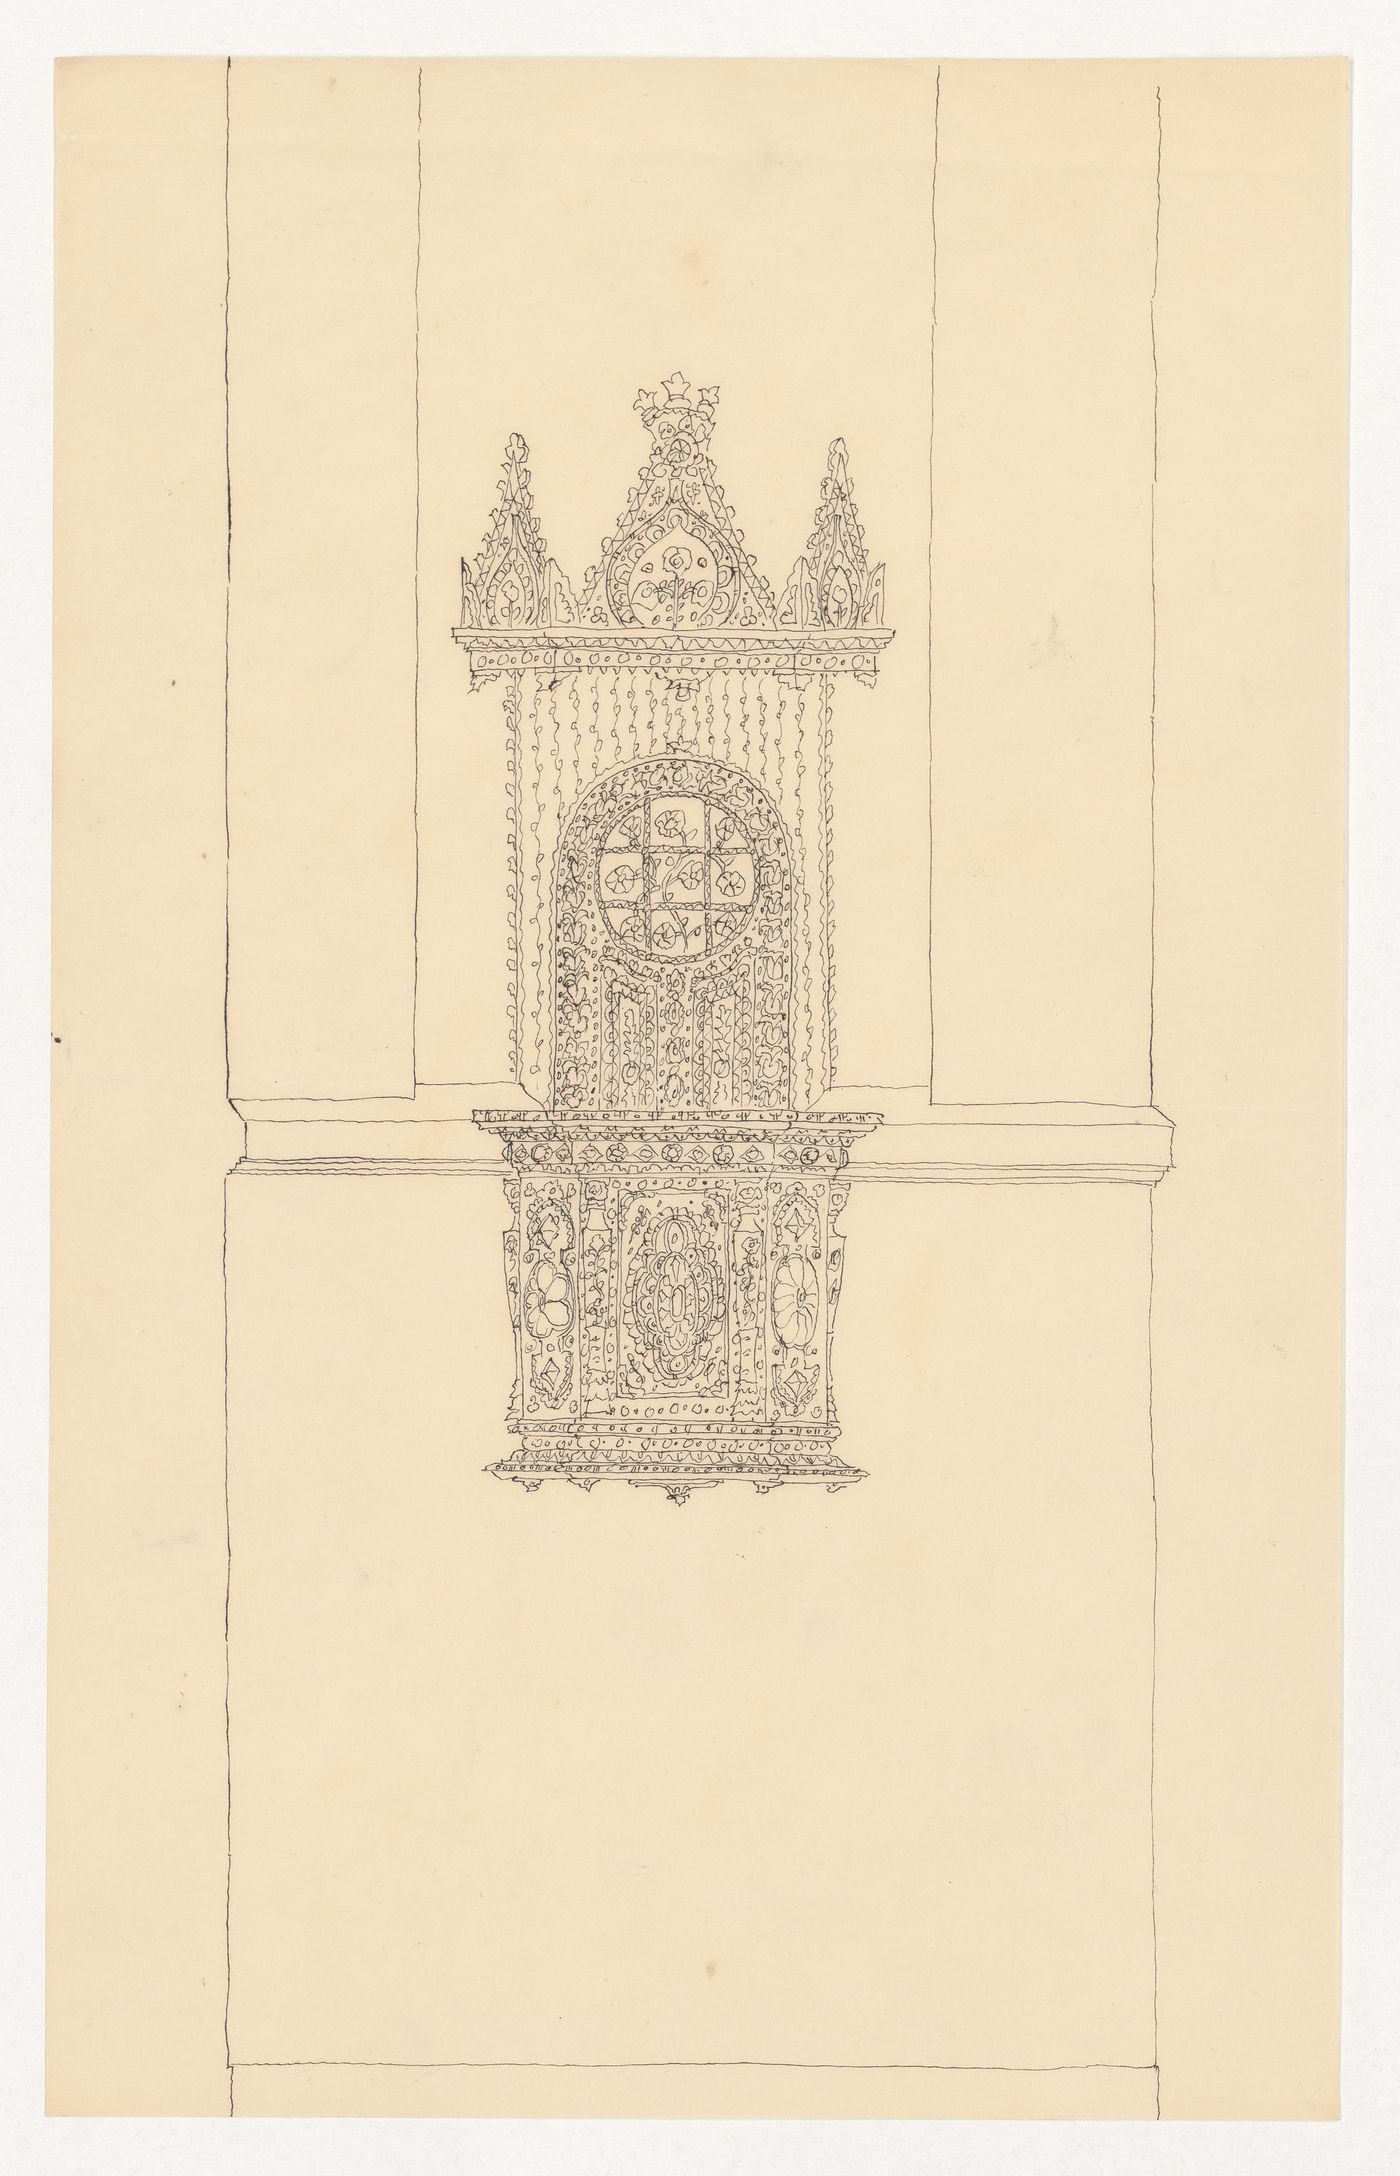 Design for architectural ornament on a wall